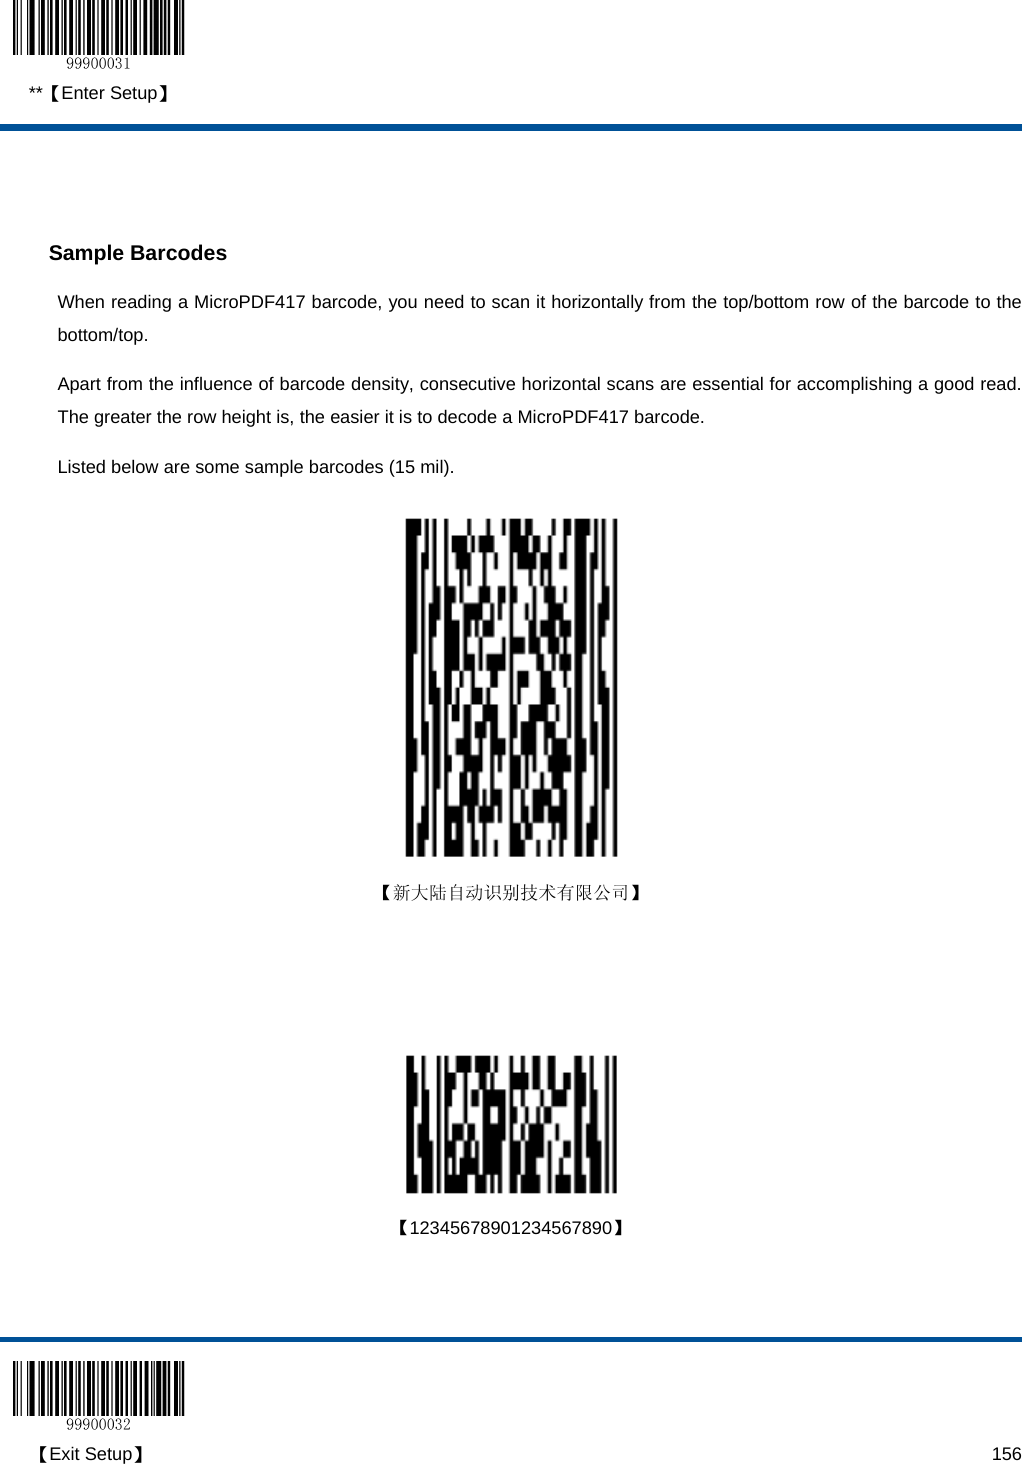  **【Enter Setup】  【Exit Setup】                                                                                                                                                                      156   Sample Barcodes When reading a MicroPDF417 barcode, you need to scan it horizontally from the top/bottom row of the barcode to the bottom/top.    Apart from the influence of barcode density, consecutive horizontal scans are essential for accomplishing a good read.  The greater the row height is, the easier it is to decode a MicroPDF417 barcode. Listed below are some sample barcodes (15 mil).    【新大陆自动识别技术有限公司】        【12345678901234567890】    